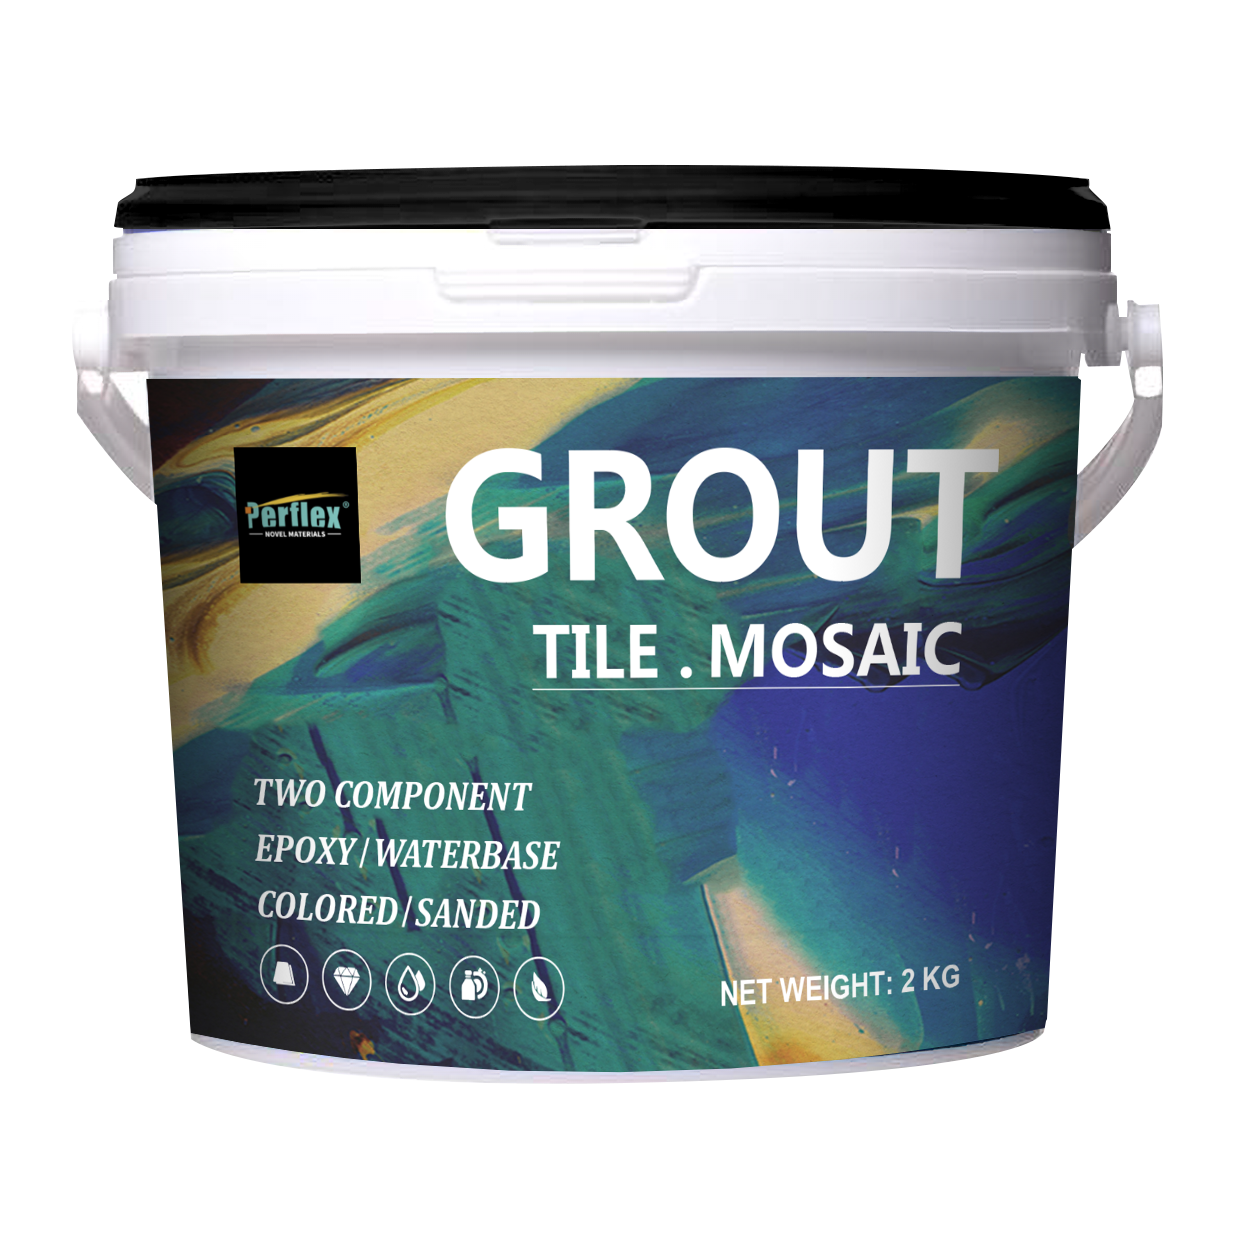 Stain Resistant Ceramic Epoxy Tile Grout Cartridge Tub CE Certificated 10